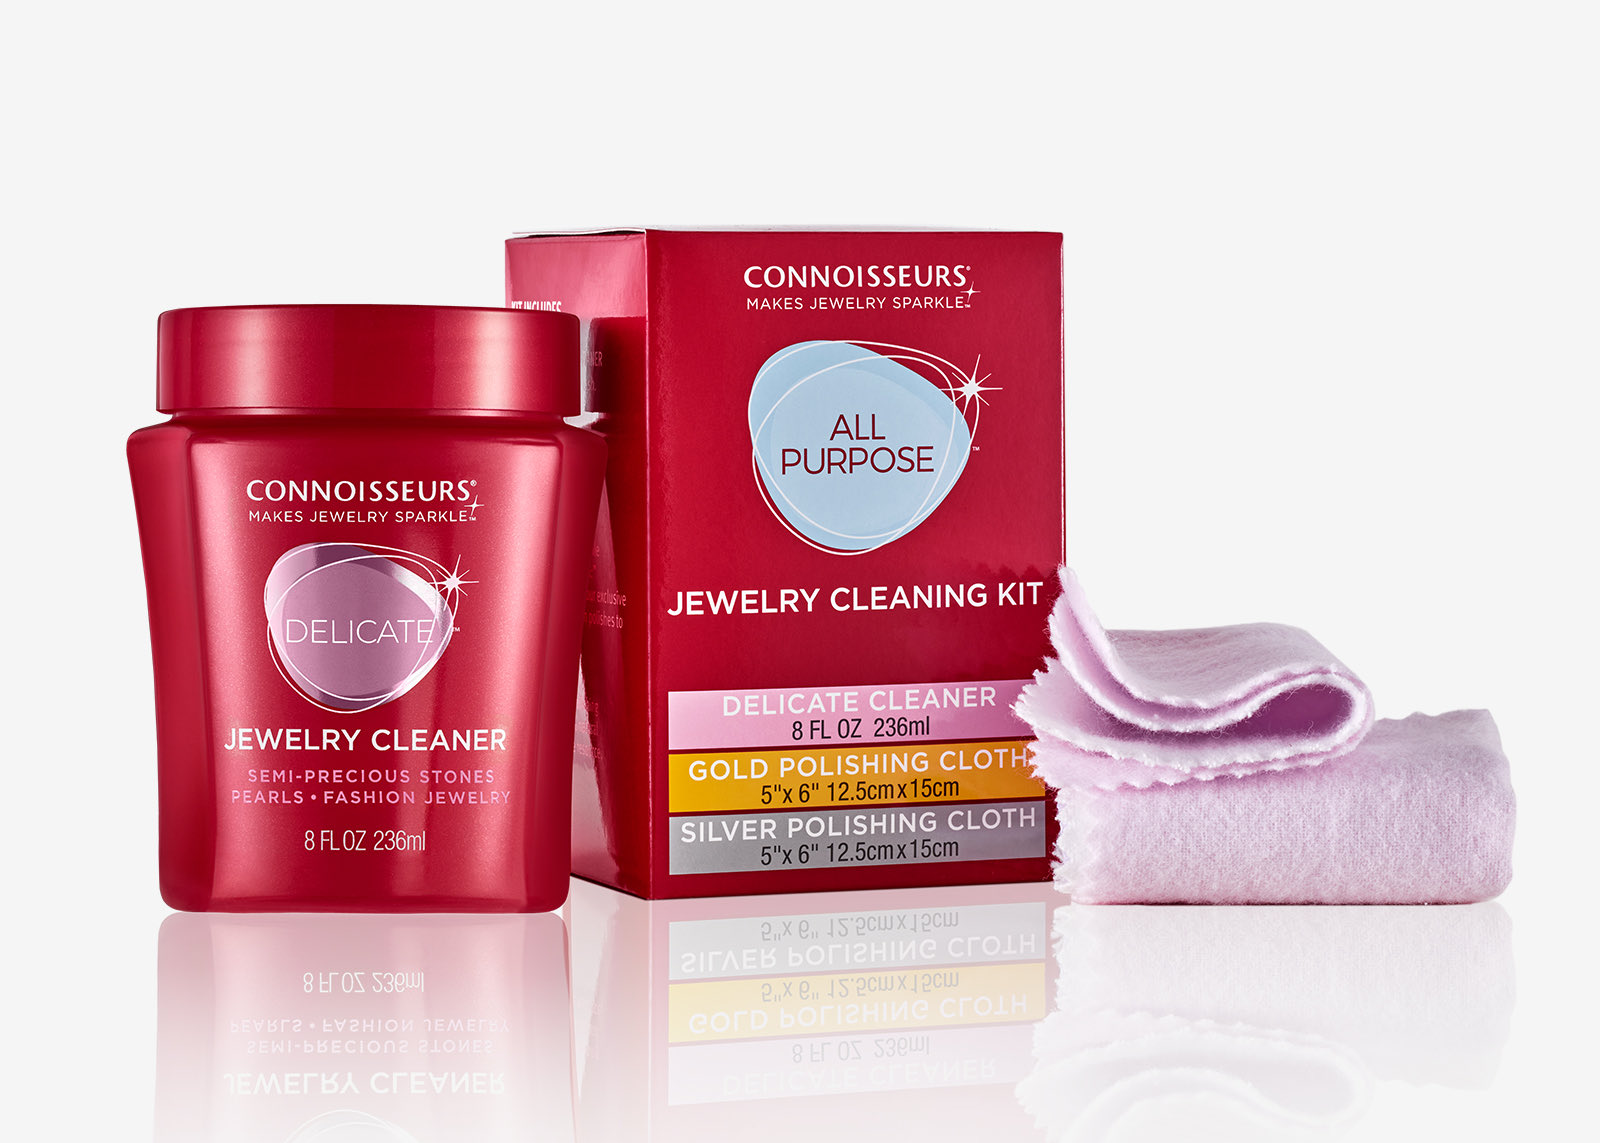 Review: Jewelry Cleaning Kit - The Best Solution for Sparkling Accessories